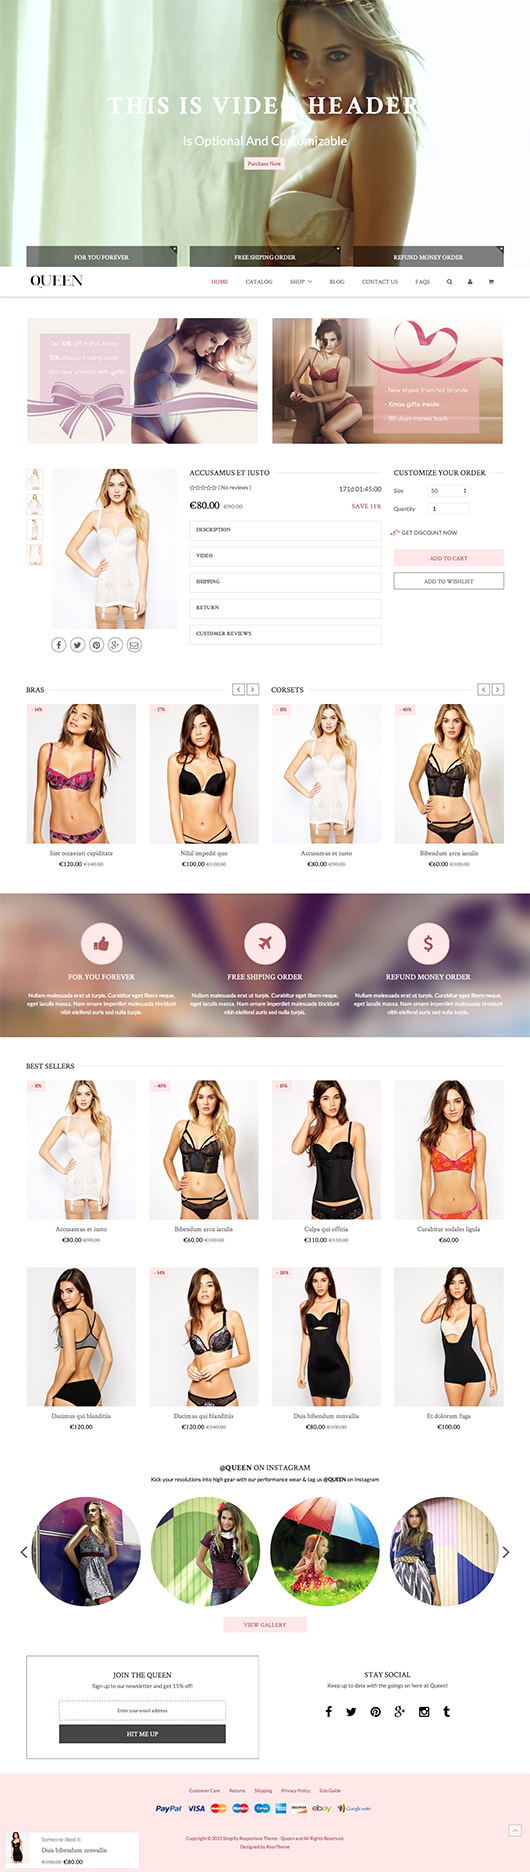 Best SHOPIFY Premium Themes Collection for Lingerie Store 2017 - Queen - Responsive Shopify Theme